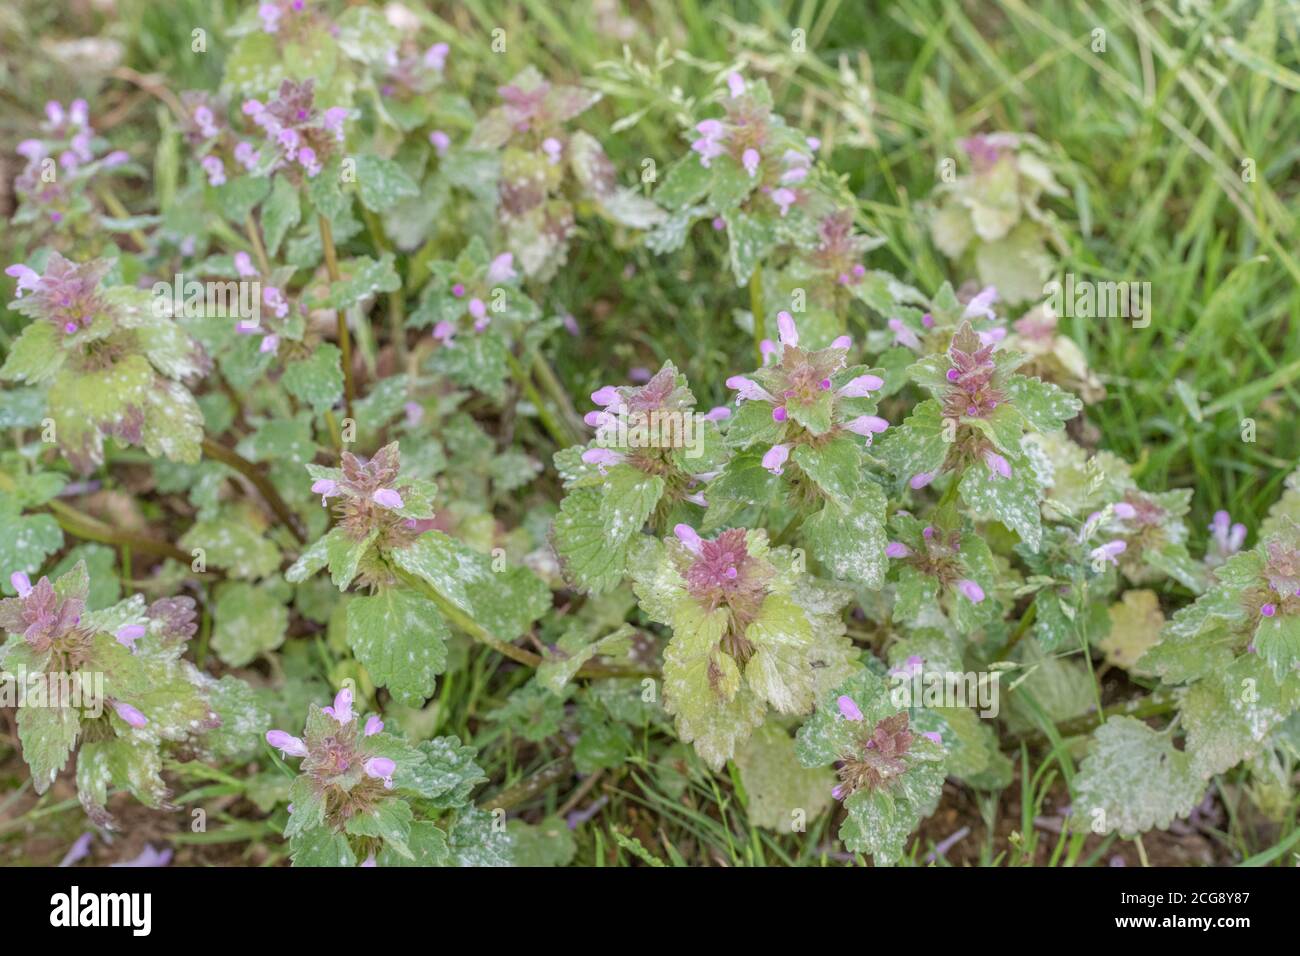 Purple flowers and foliage of Red Dead-Nettle / Lamium purpureum. Common arable and hedgerow weed, once used as a medicinal plant in herbal remedies. Stock Photo